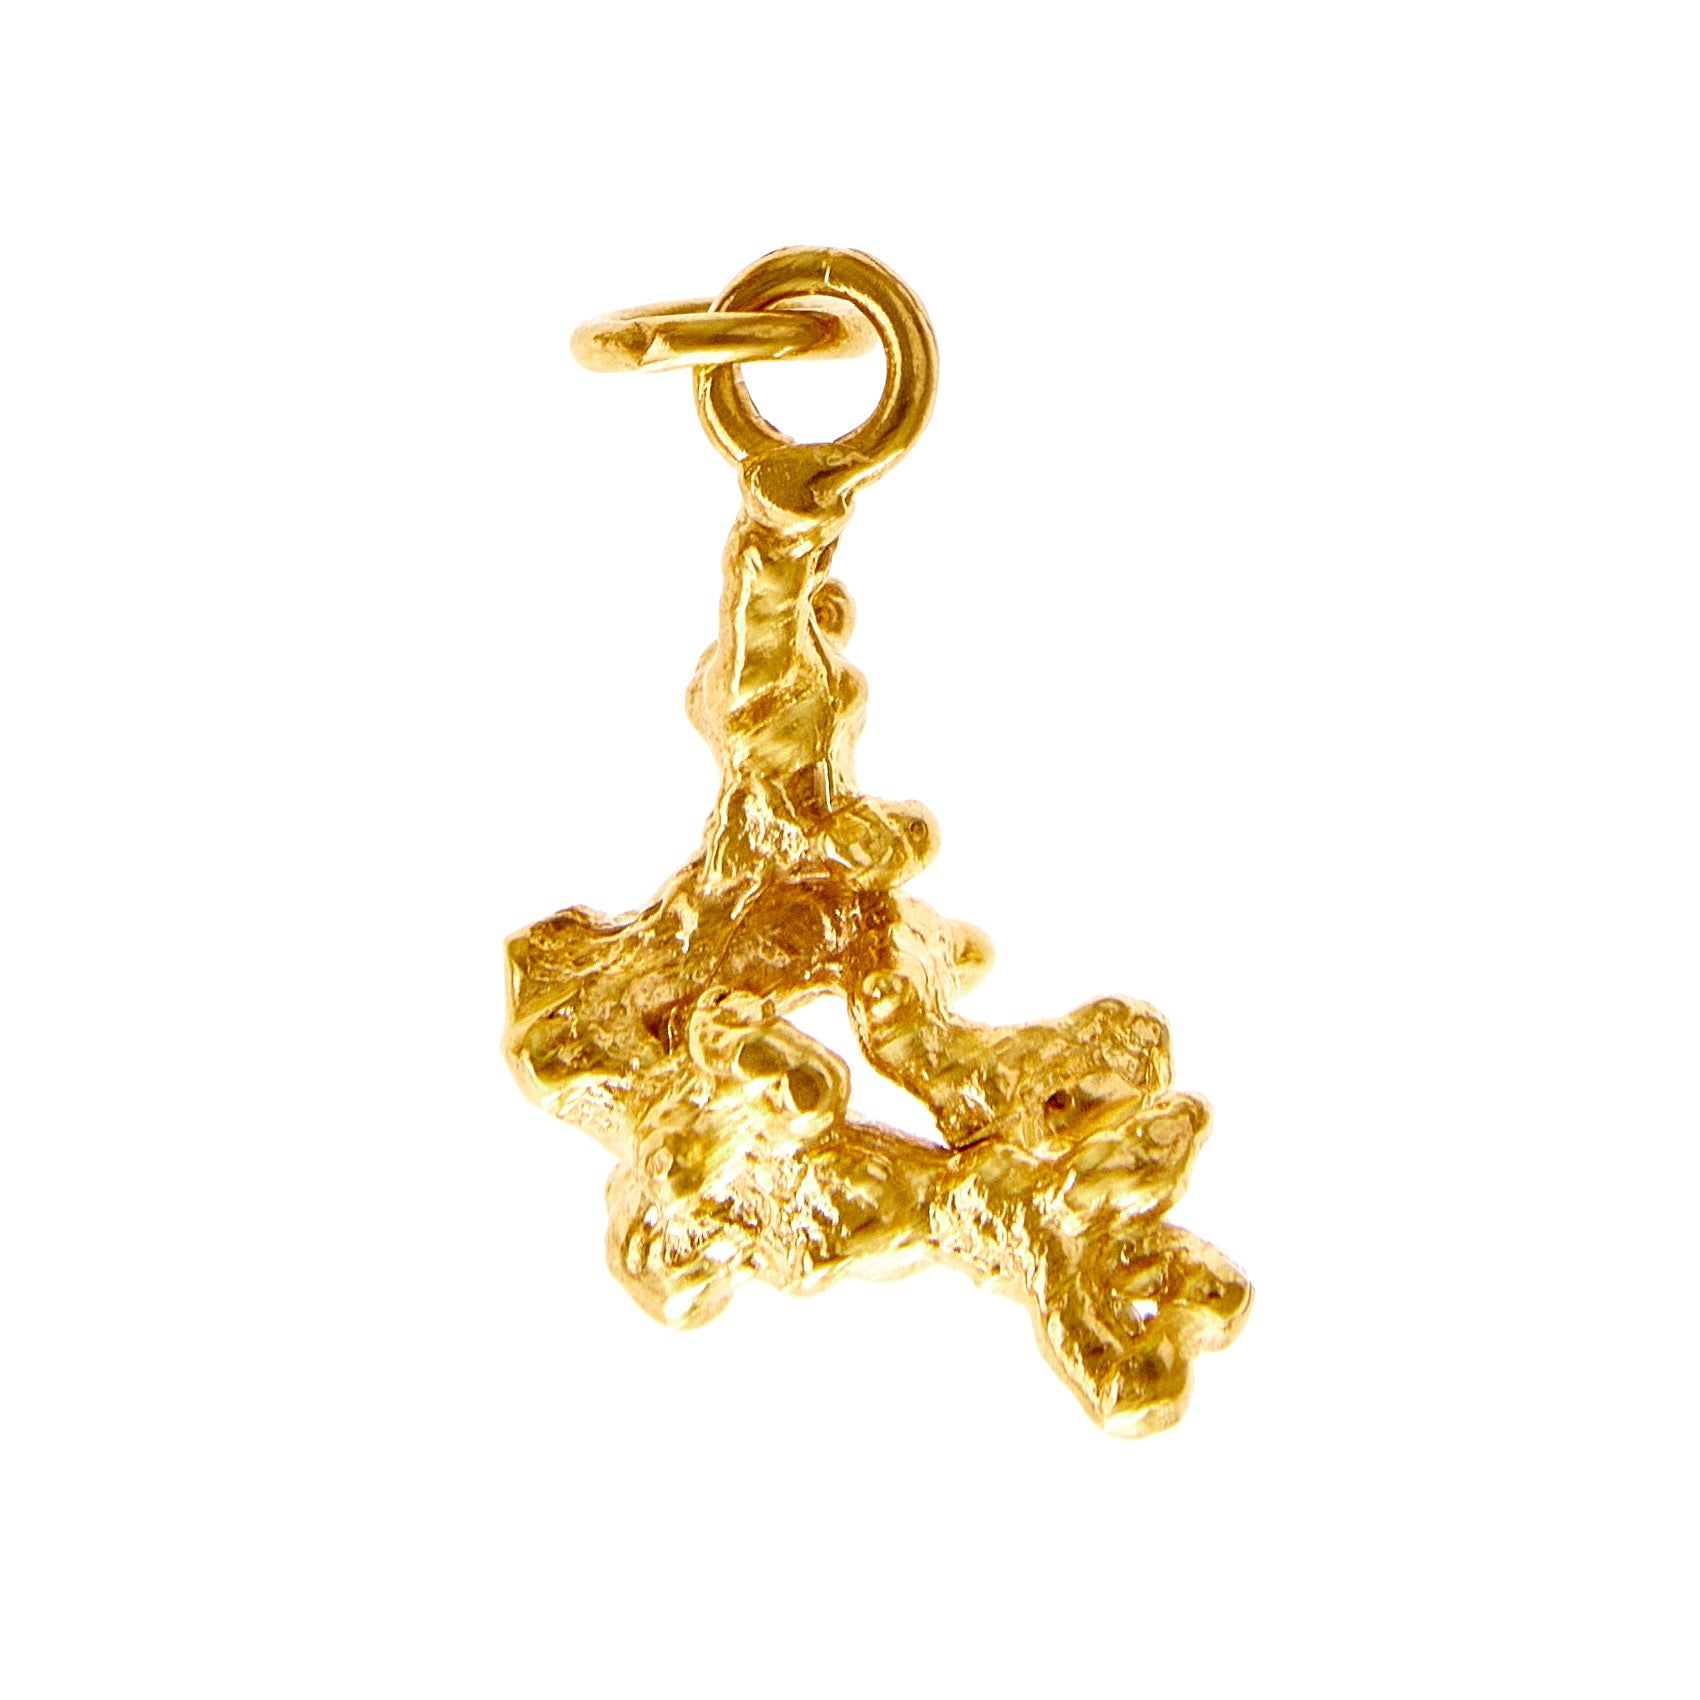 Corallia Speos Charm - Gold Plated Brass